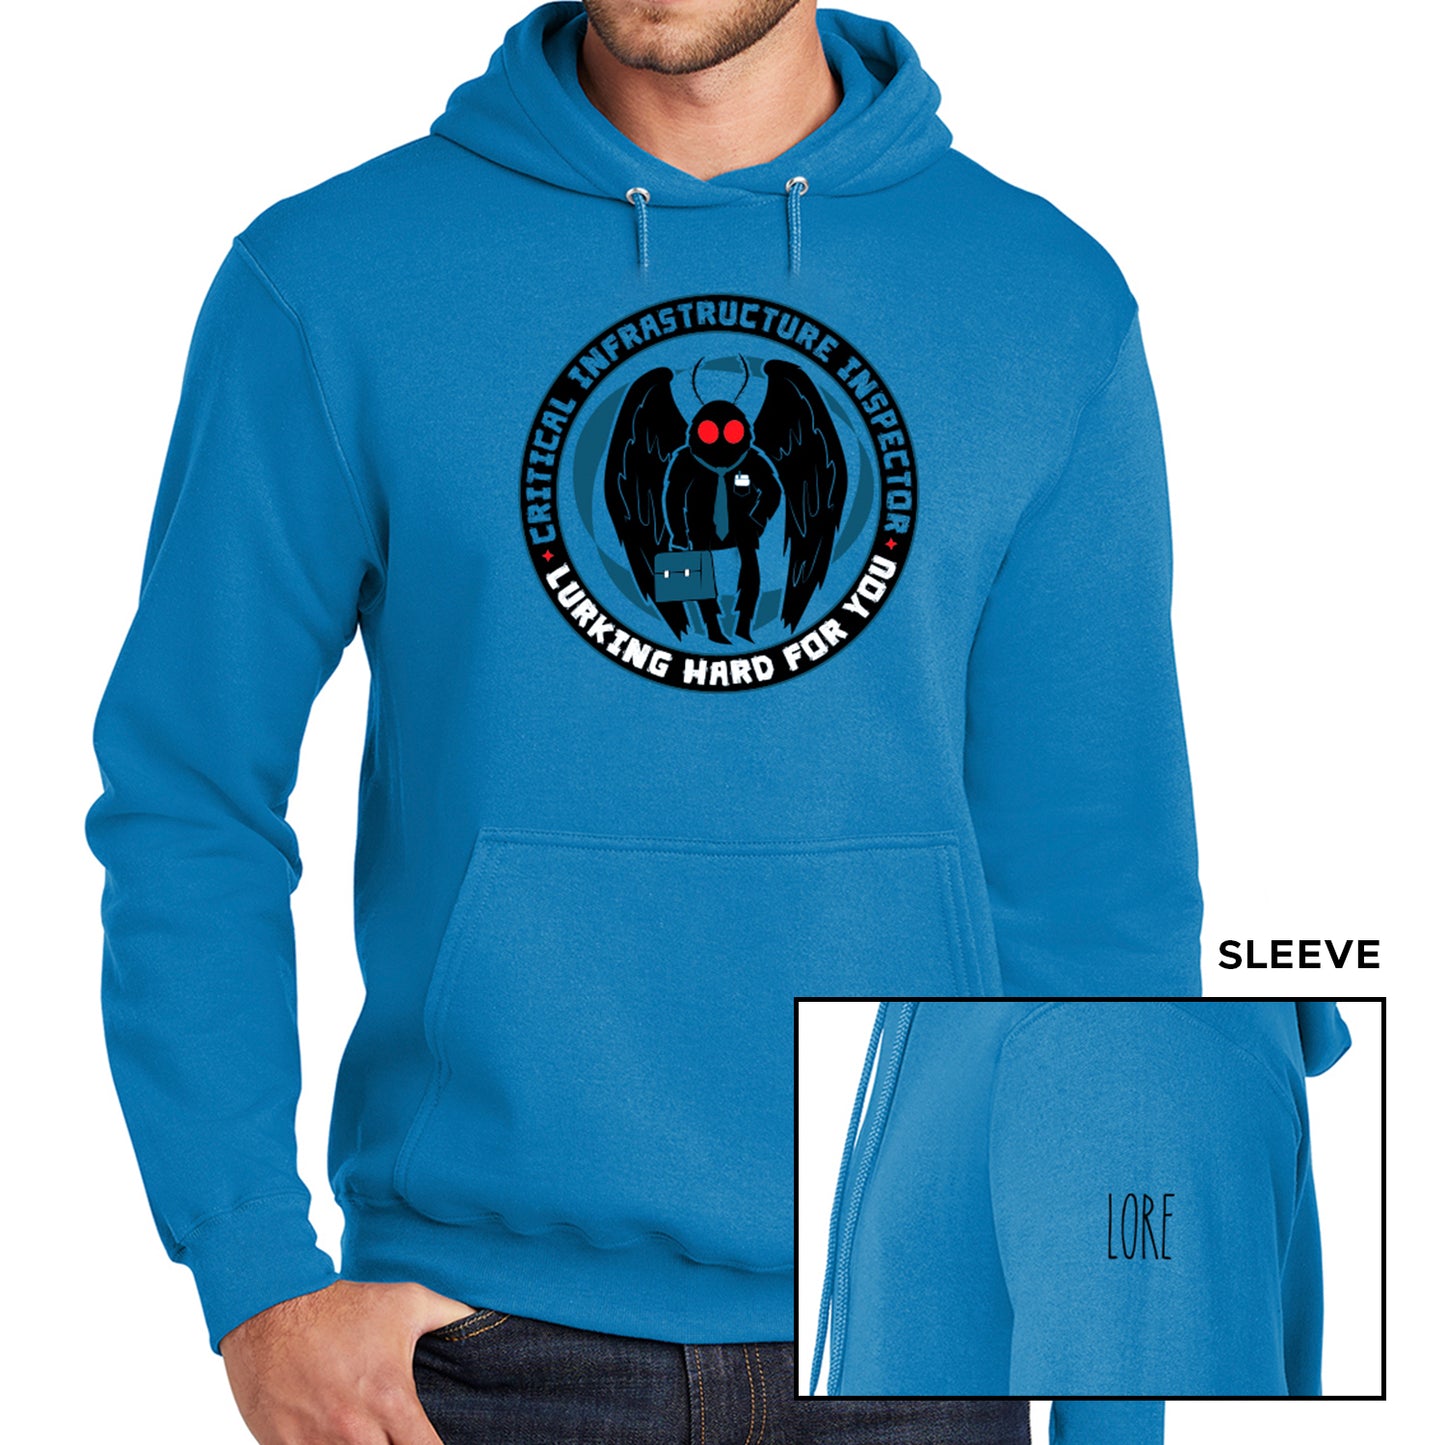 A male model wearing a turquoise hoodie with matching drawstrings and a kangaroo pocket. The tee has a black ring featuring the words "Critical infrastructure inspector" in turquoise font and "Working hard for you" in white font. Within the ring is a black cartoon Mothman with red eyes, a turquoise tie, and a turqouise briefcase set against a darker shadow. One sleeve features the 'LORE' logo in black.